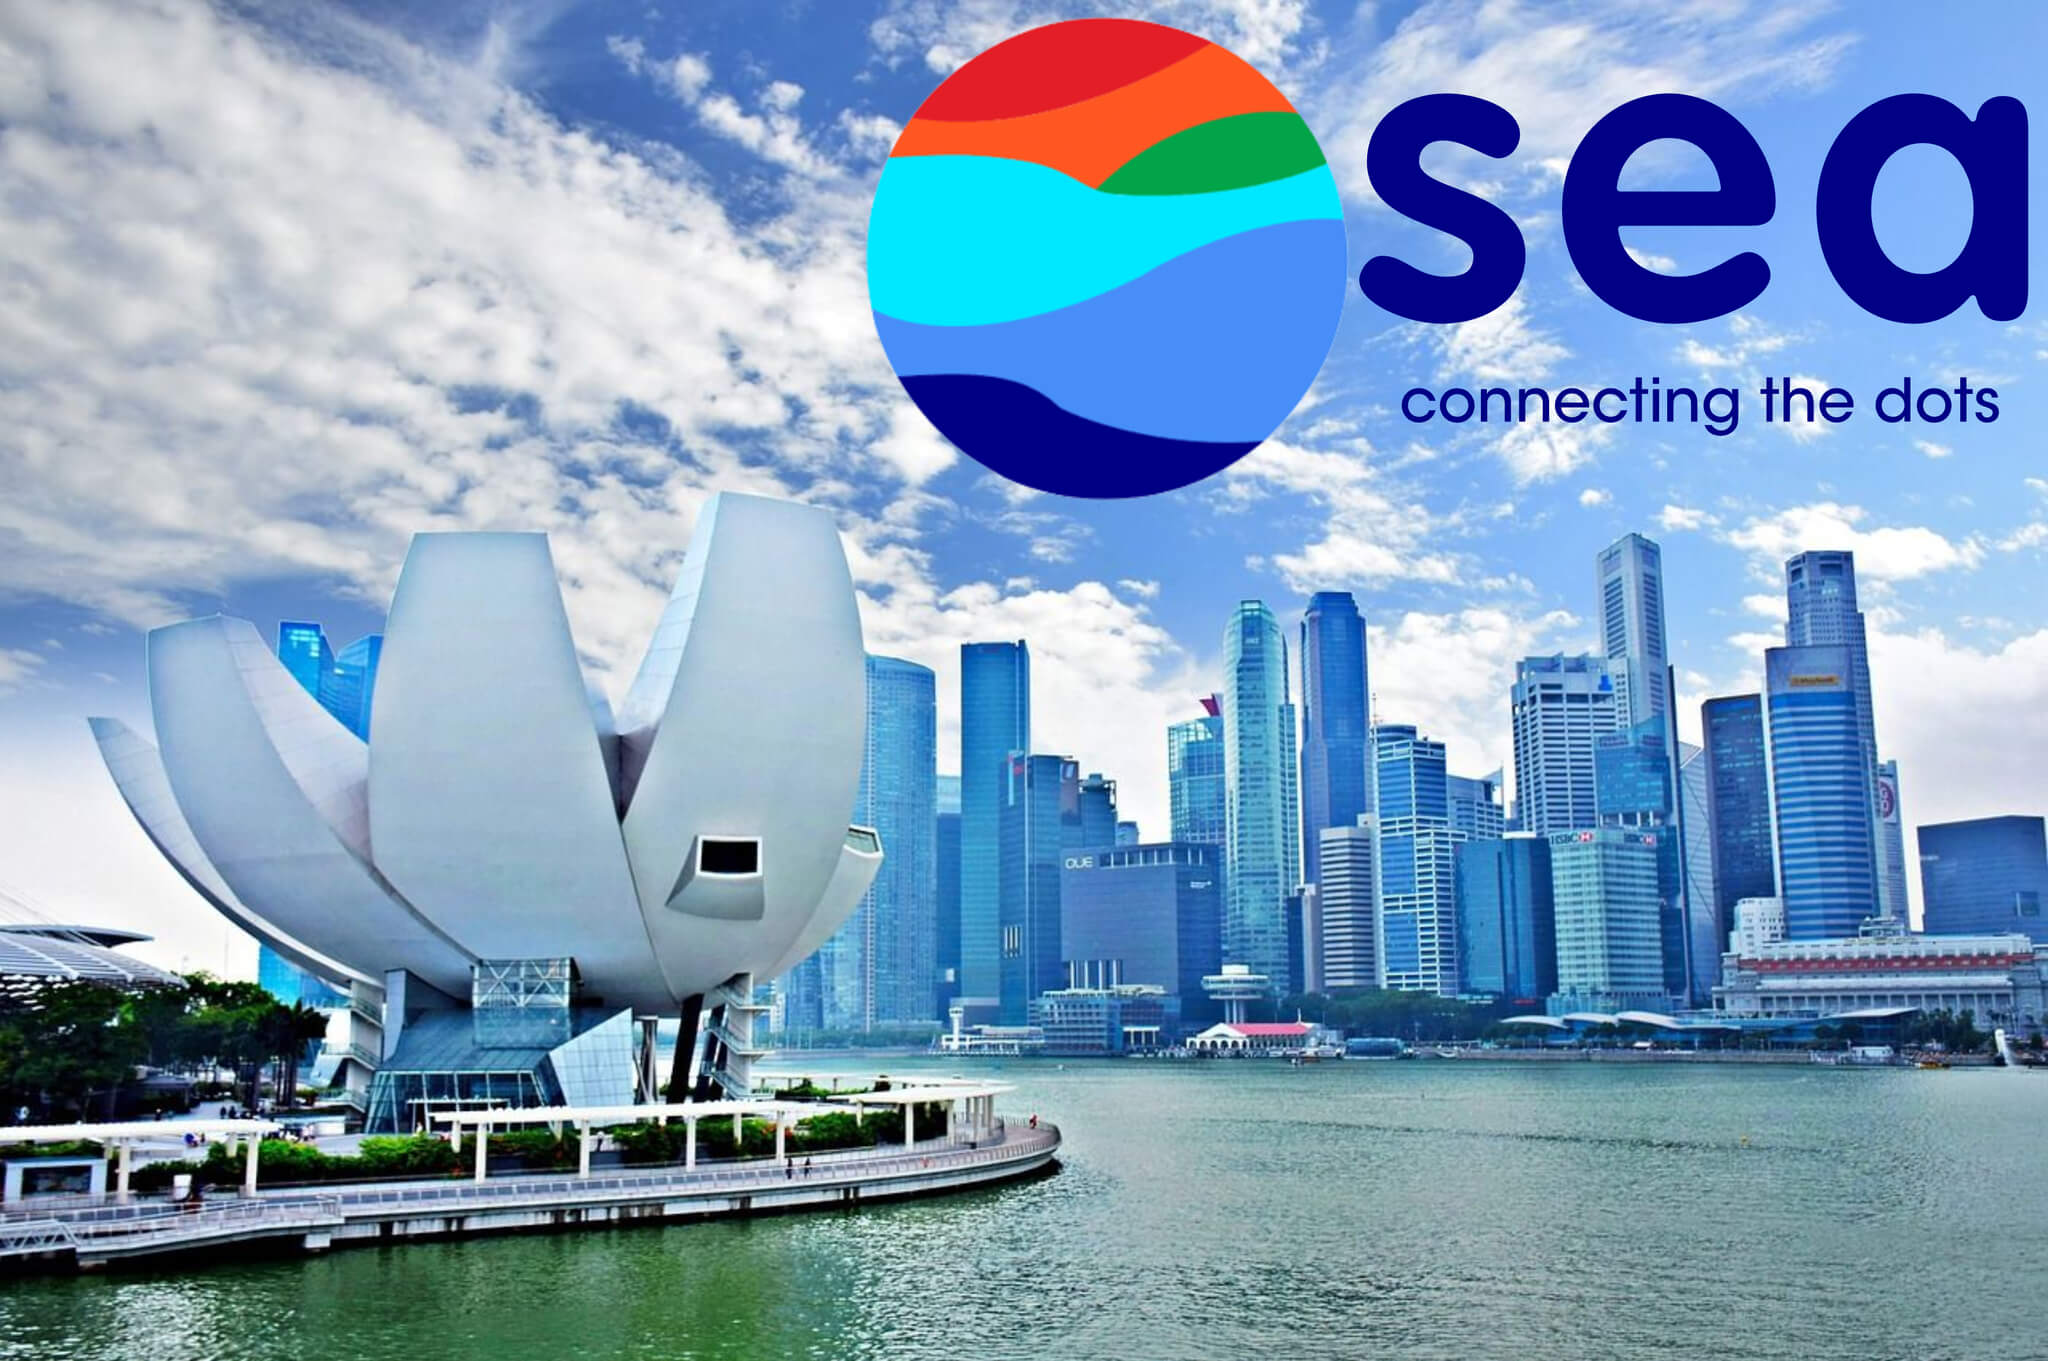 Sea Limited NYSE:SE ECommerce and Digital Financial Services